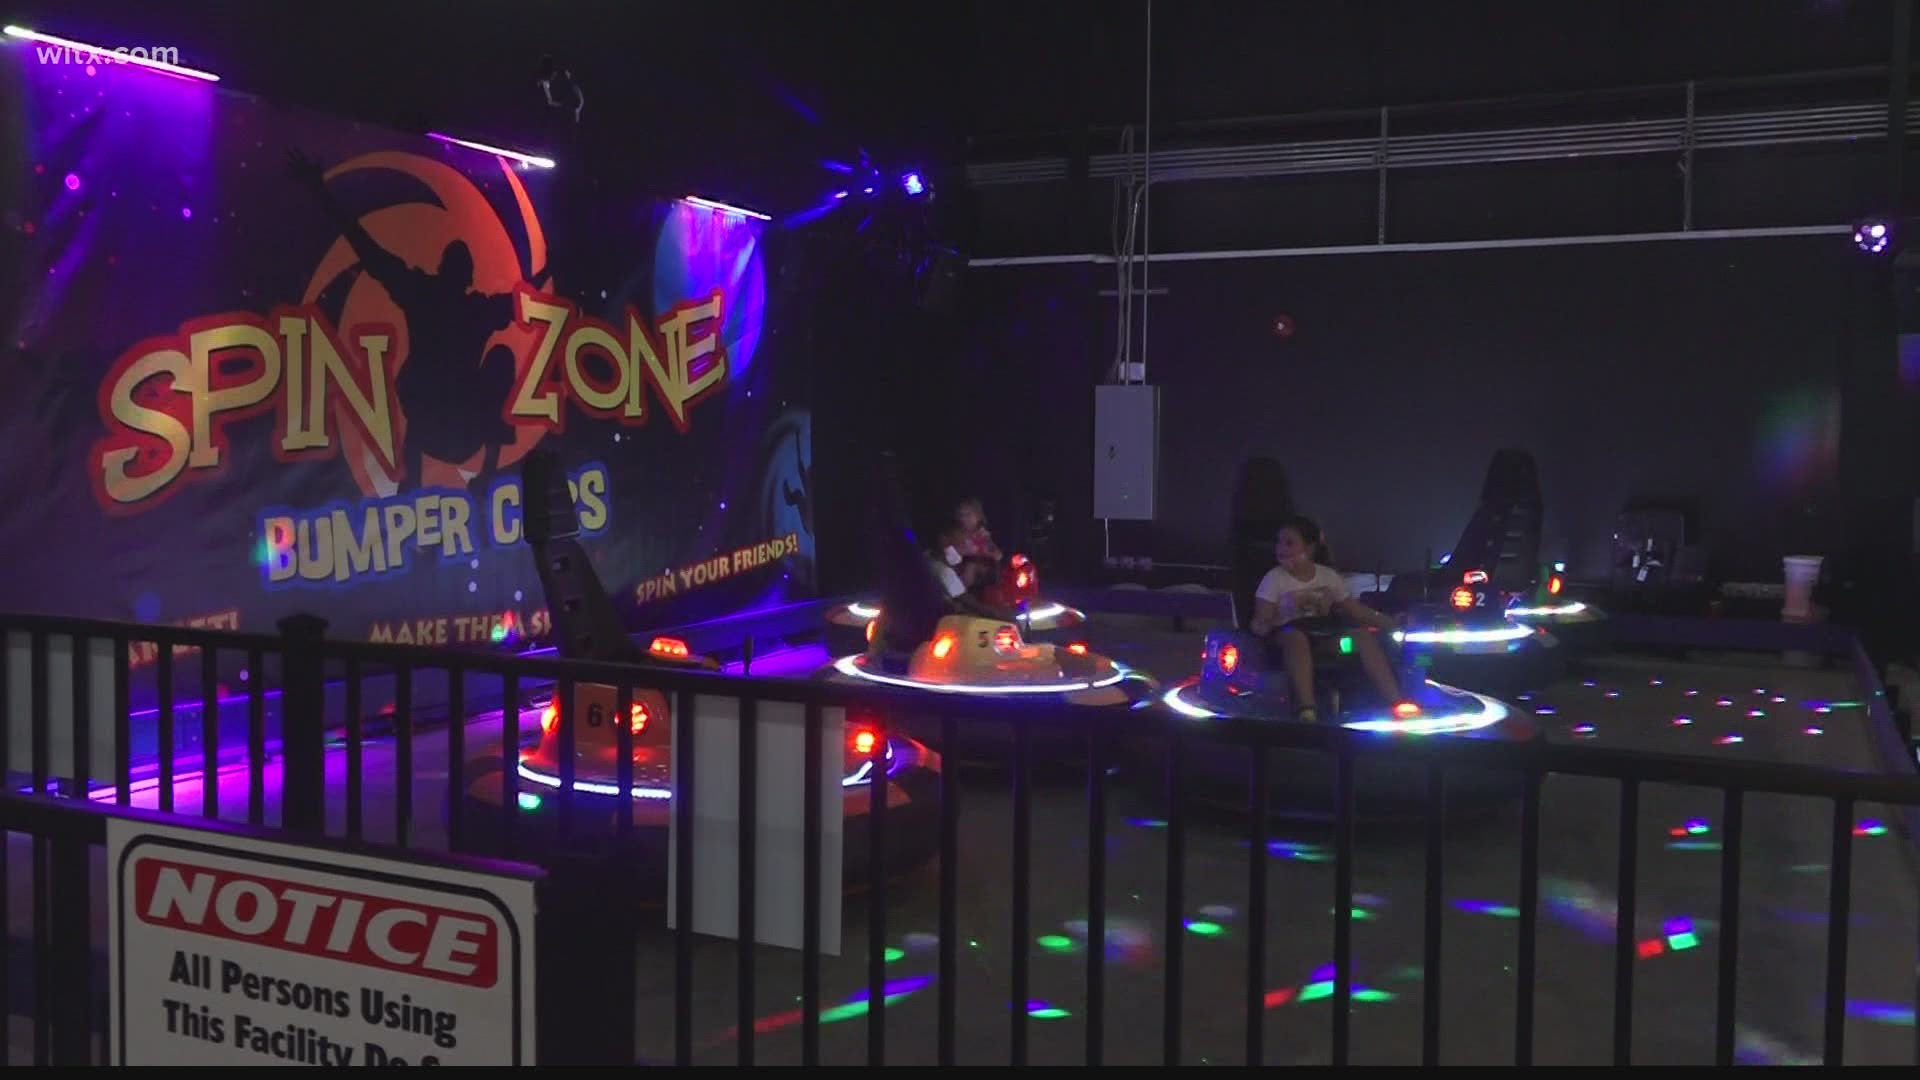 A new entertainment facility is opening in Orangeburg and families are excited.